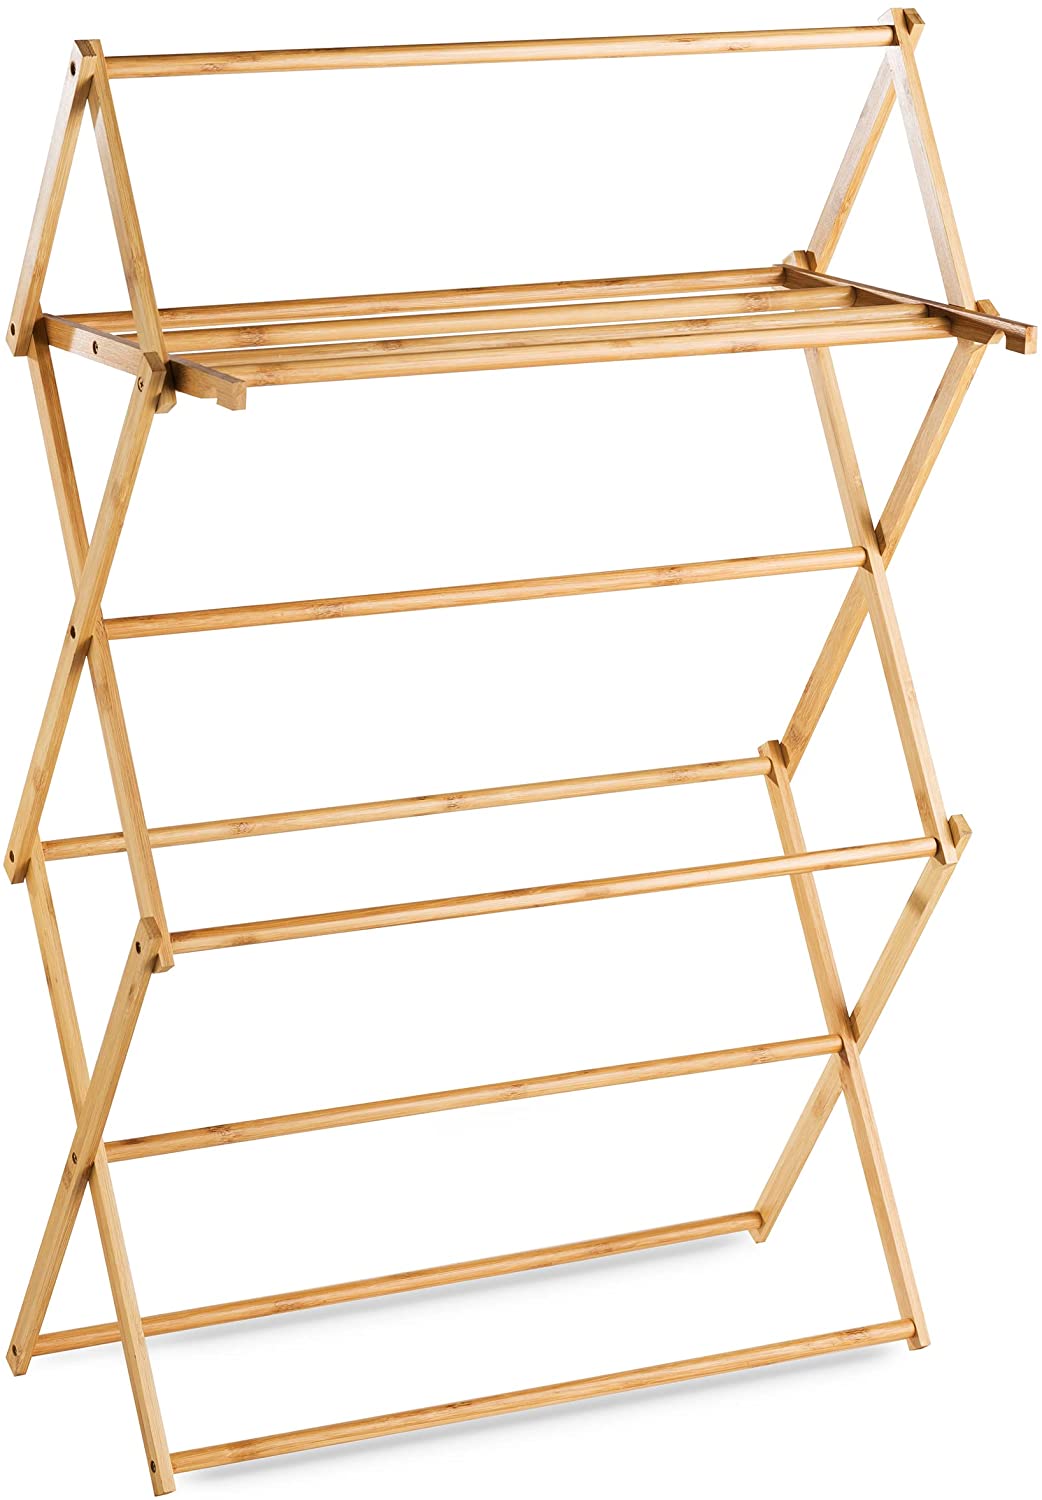 Bartnelli Bamboo Laundry Drying Rack for Clothes, Wood Clothing Dryer, Extreme Stability, Heavy Duty Built, Foldable, Collapsible Space Saving | Indoor-Outdoor Use - Pre-Assembled (BDR-553)